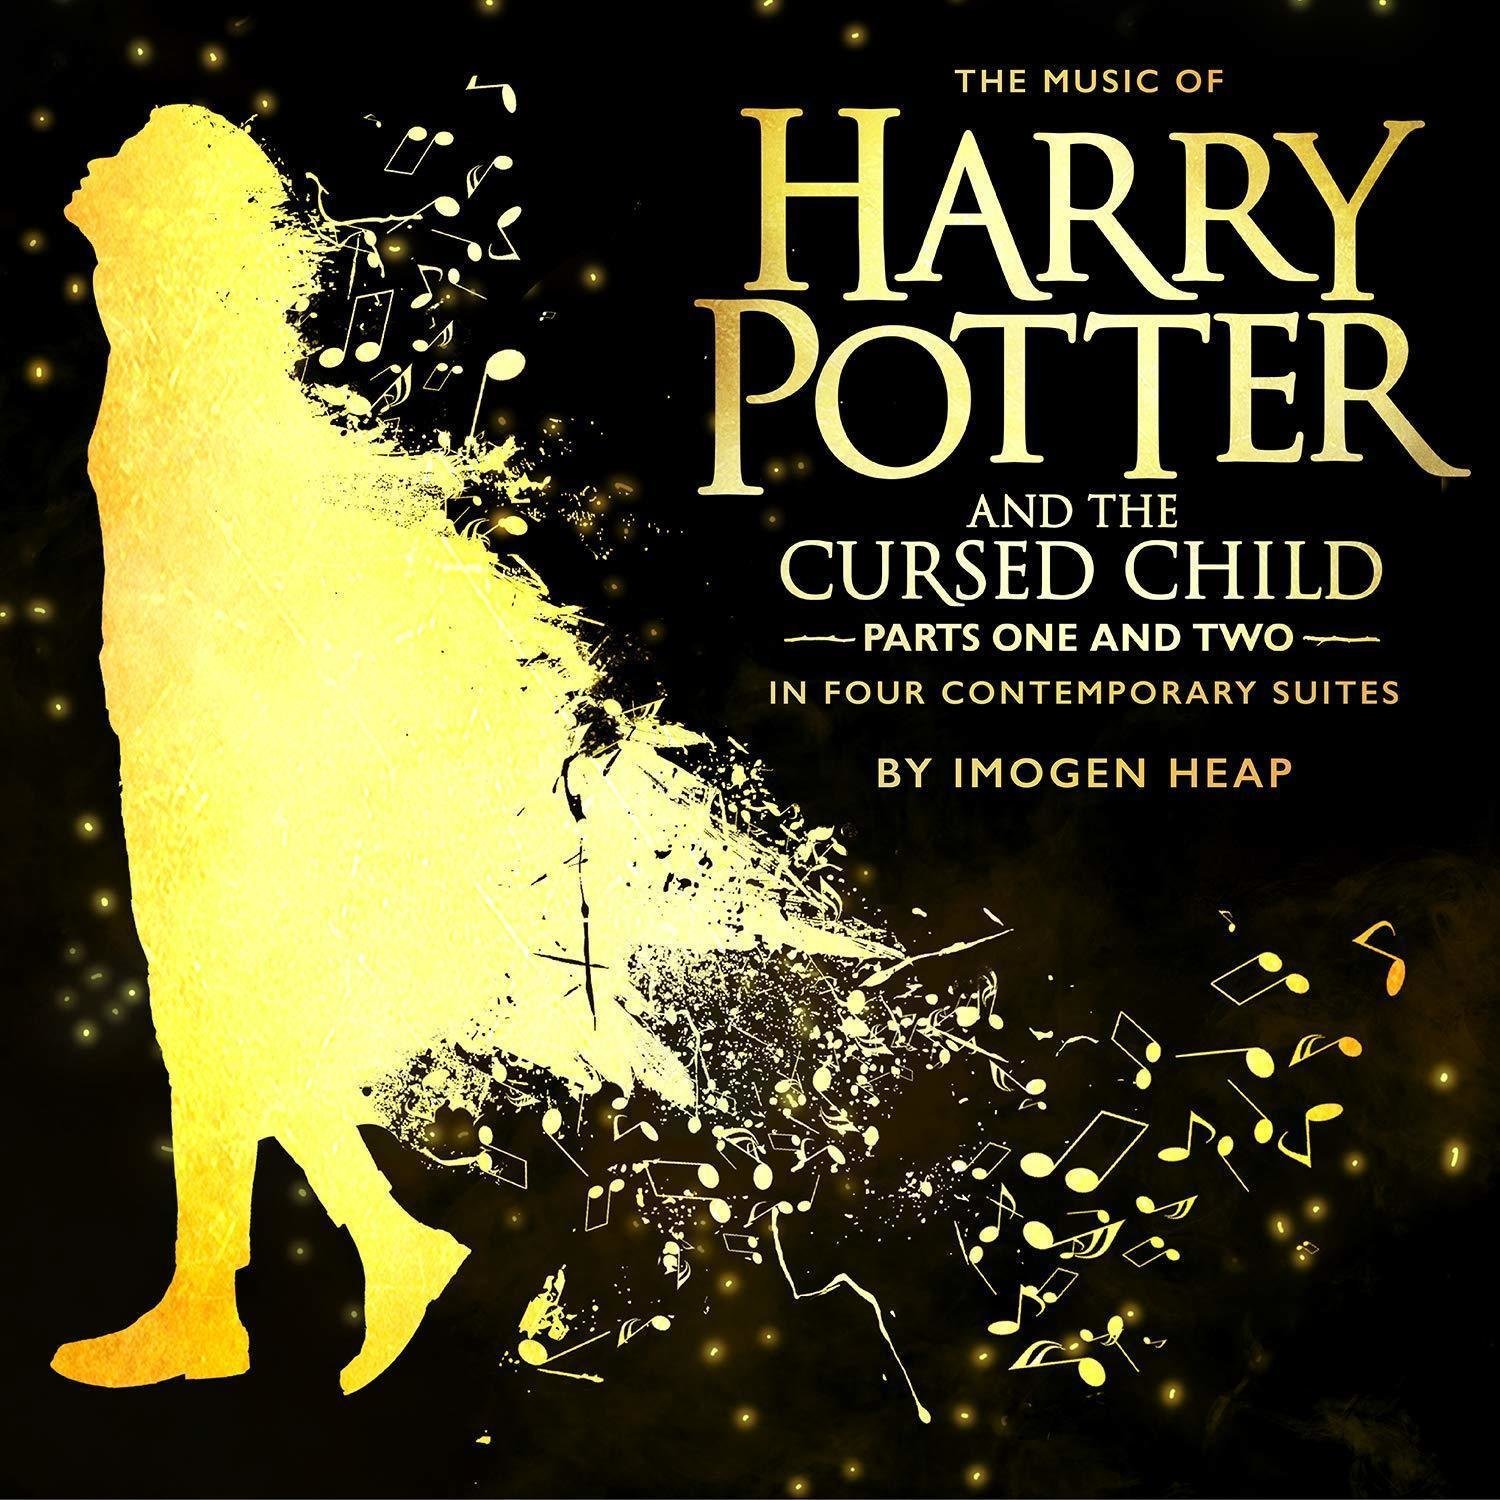 Vinyl Record Imogen Heap Music of Harry Potter and the Cursed Child - In Four Contemporary Suites (2 LP)